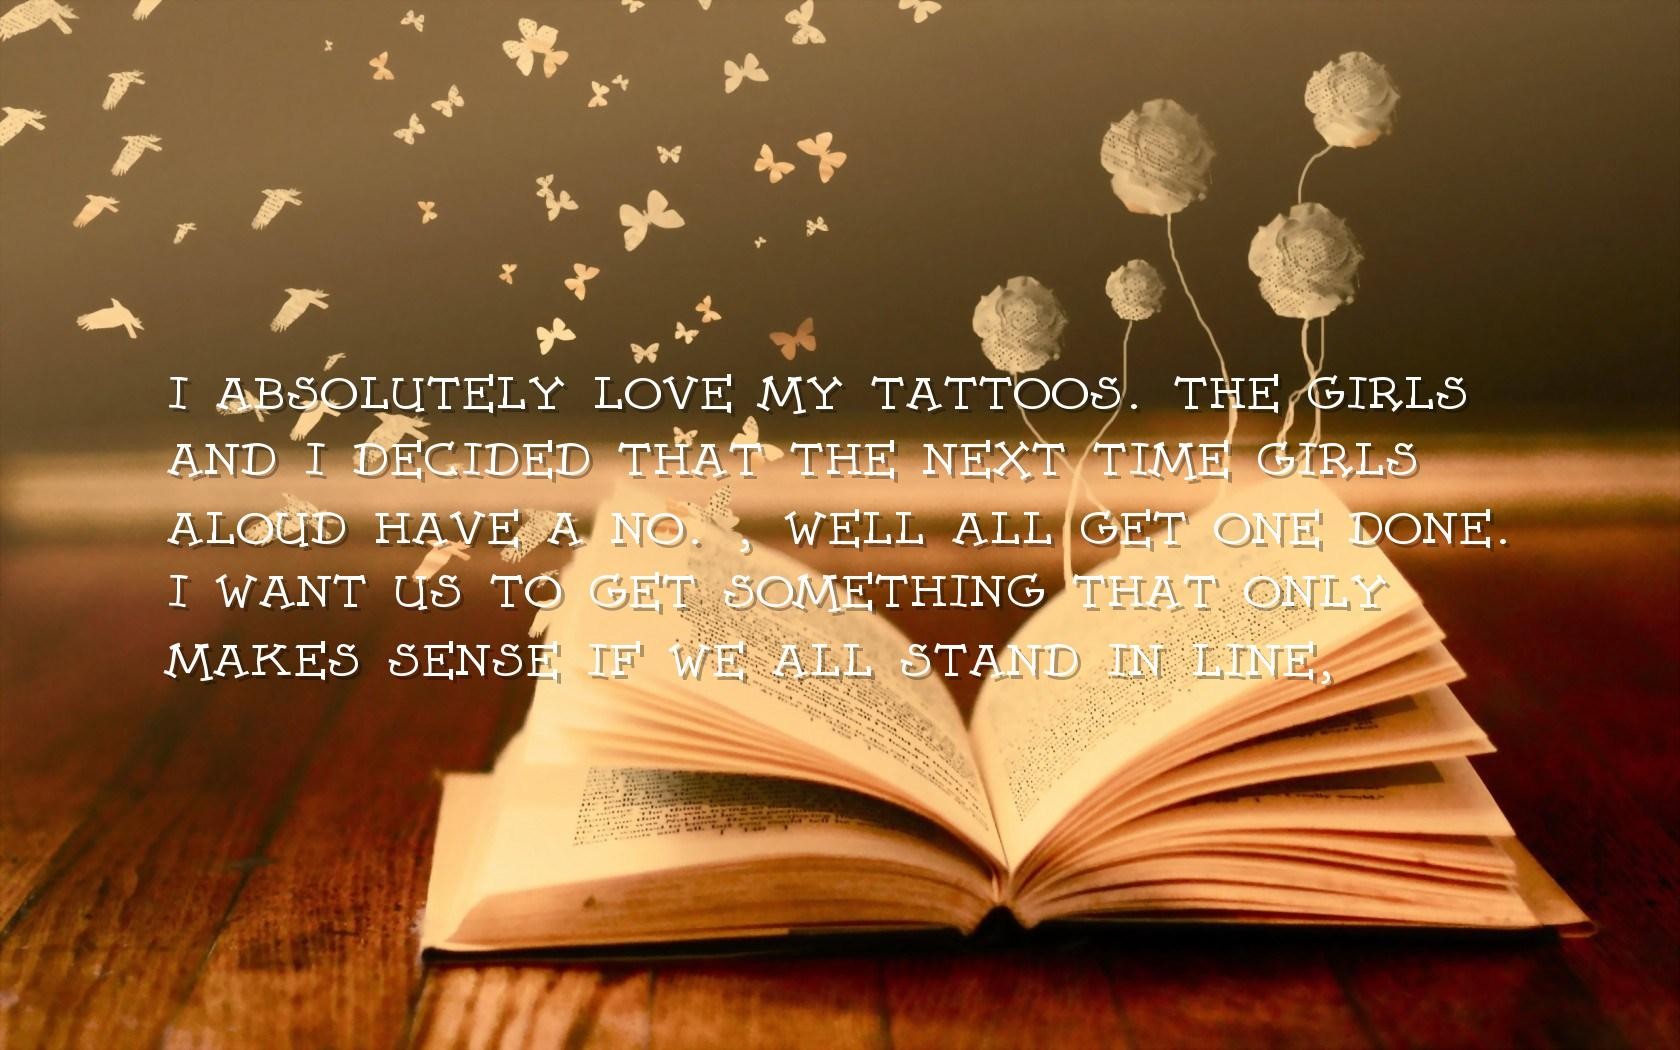 Quotes To Get As Tattoos